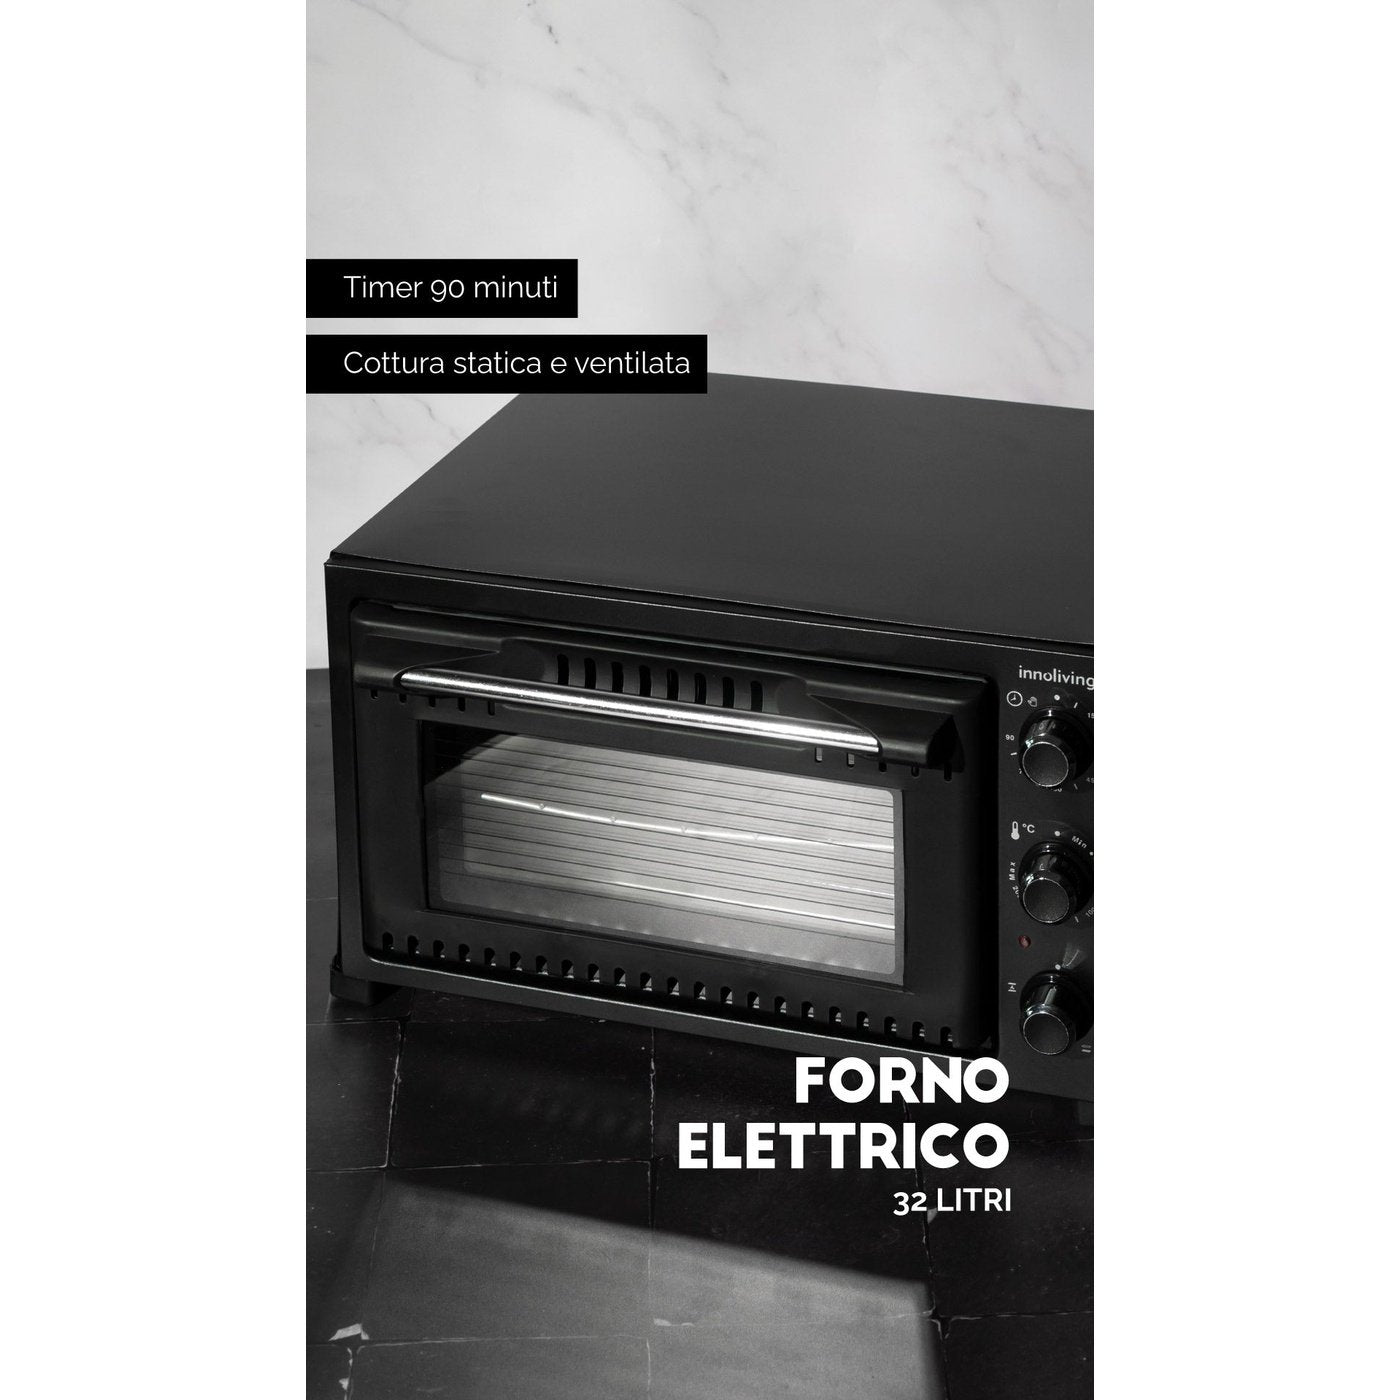 Electric convection oven 32 liters with timer trays and internal light, Innoliving INN-794